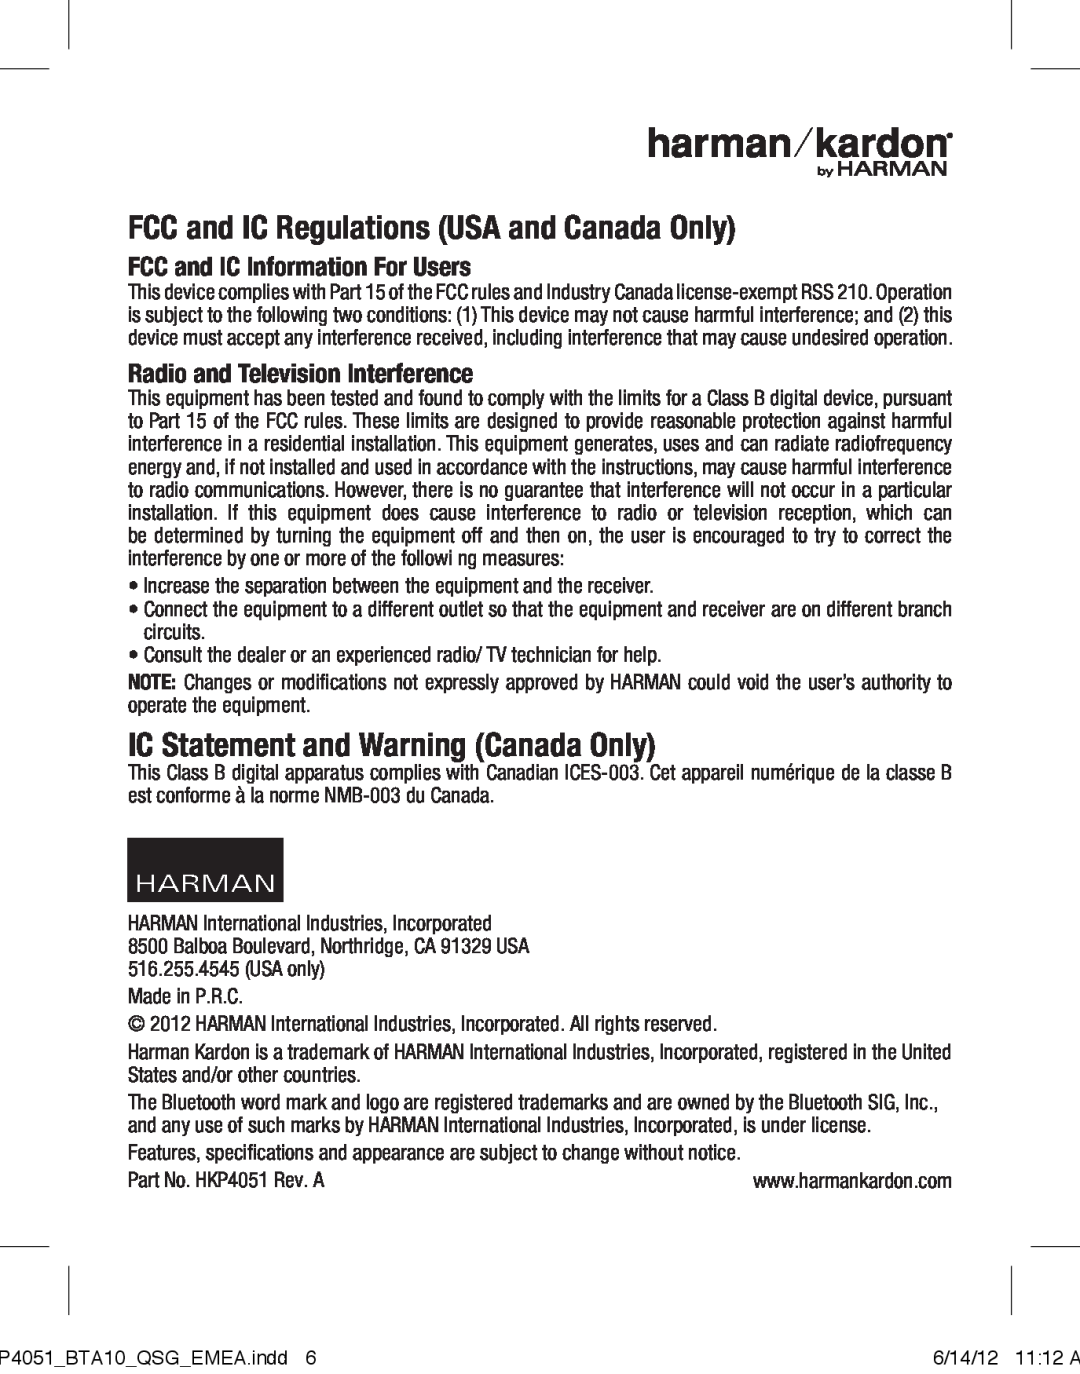 Harman-Kardon BTA 10 setup guide FCC and IC Regulations USA and Canada Only, IC Statement and Warning Canada Only 